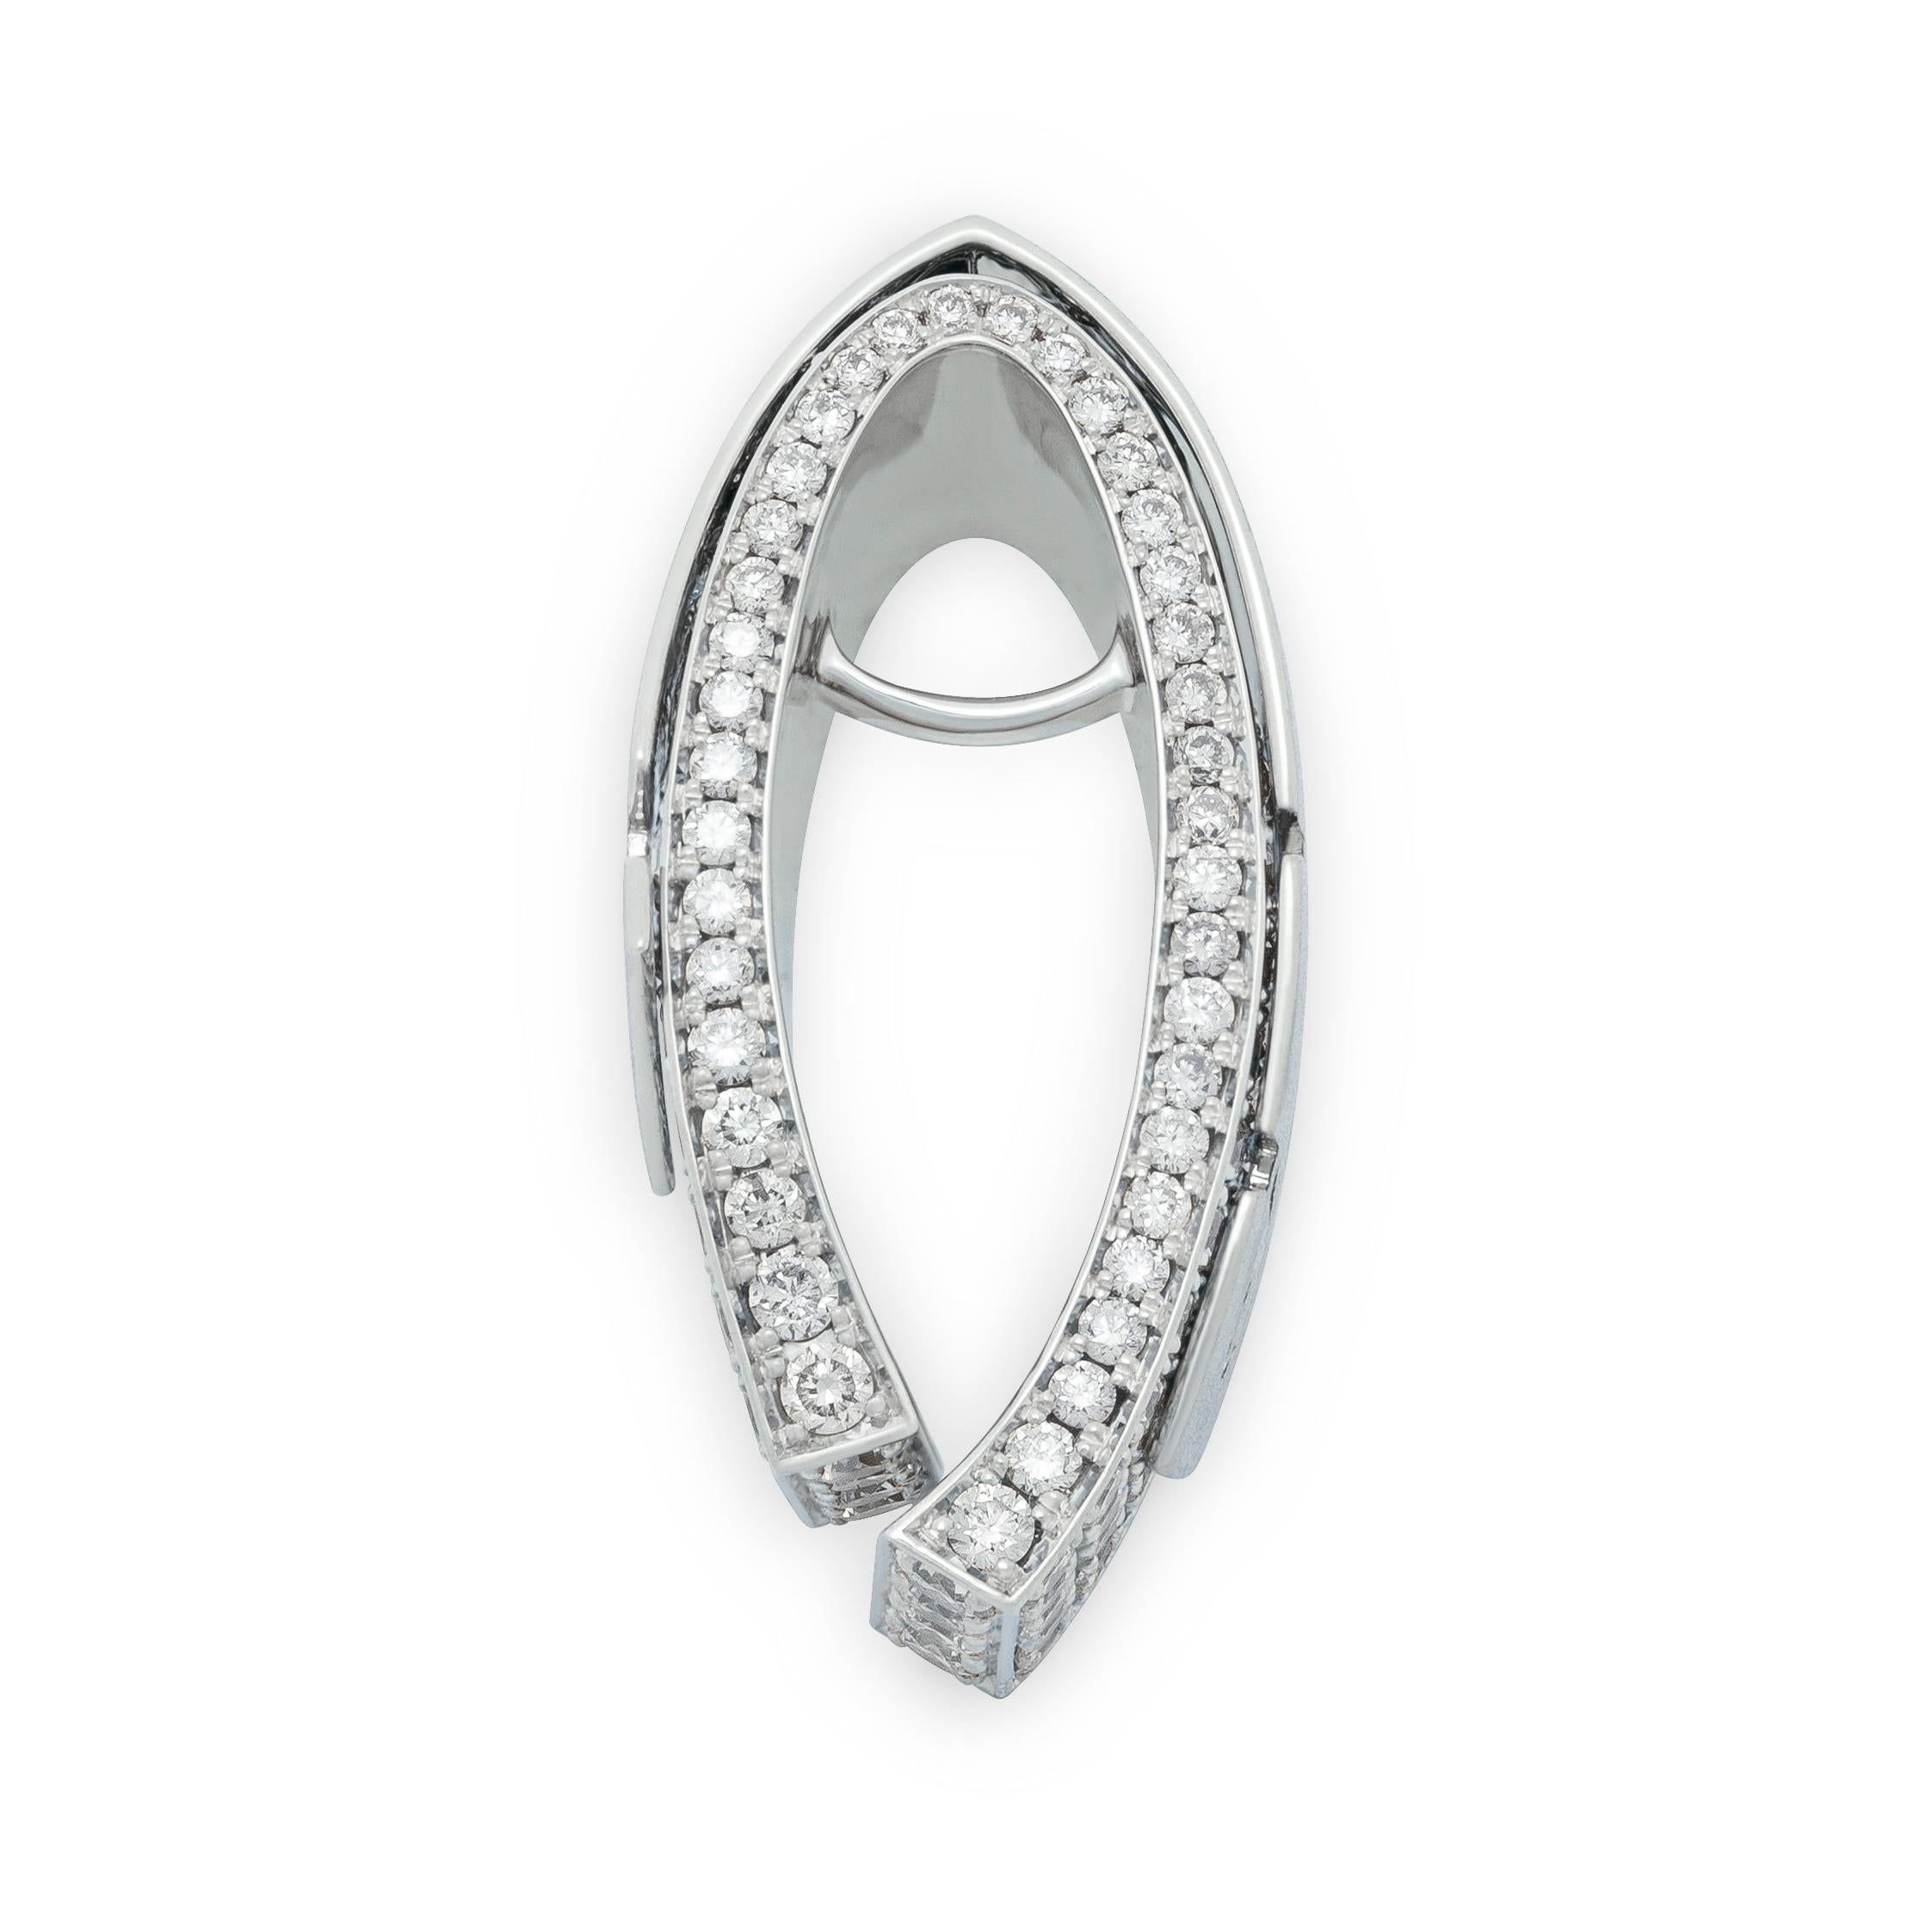 Diamonds 18 Karat White Gold Pret-a-Porter Pendant

Veil inspired this jewelry series by our designers. For example, this Pendant seems to have two layers. The first layer is a 